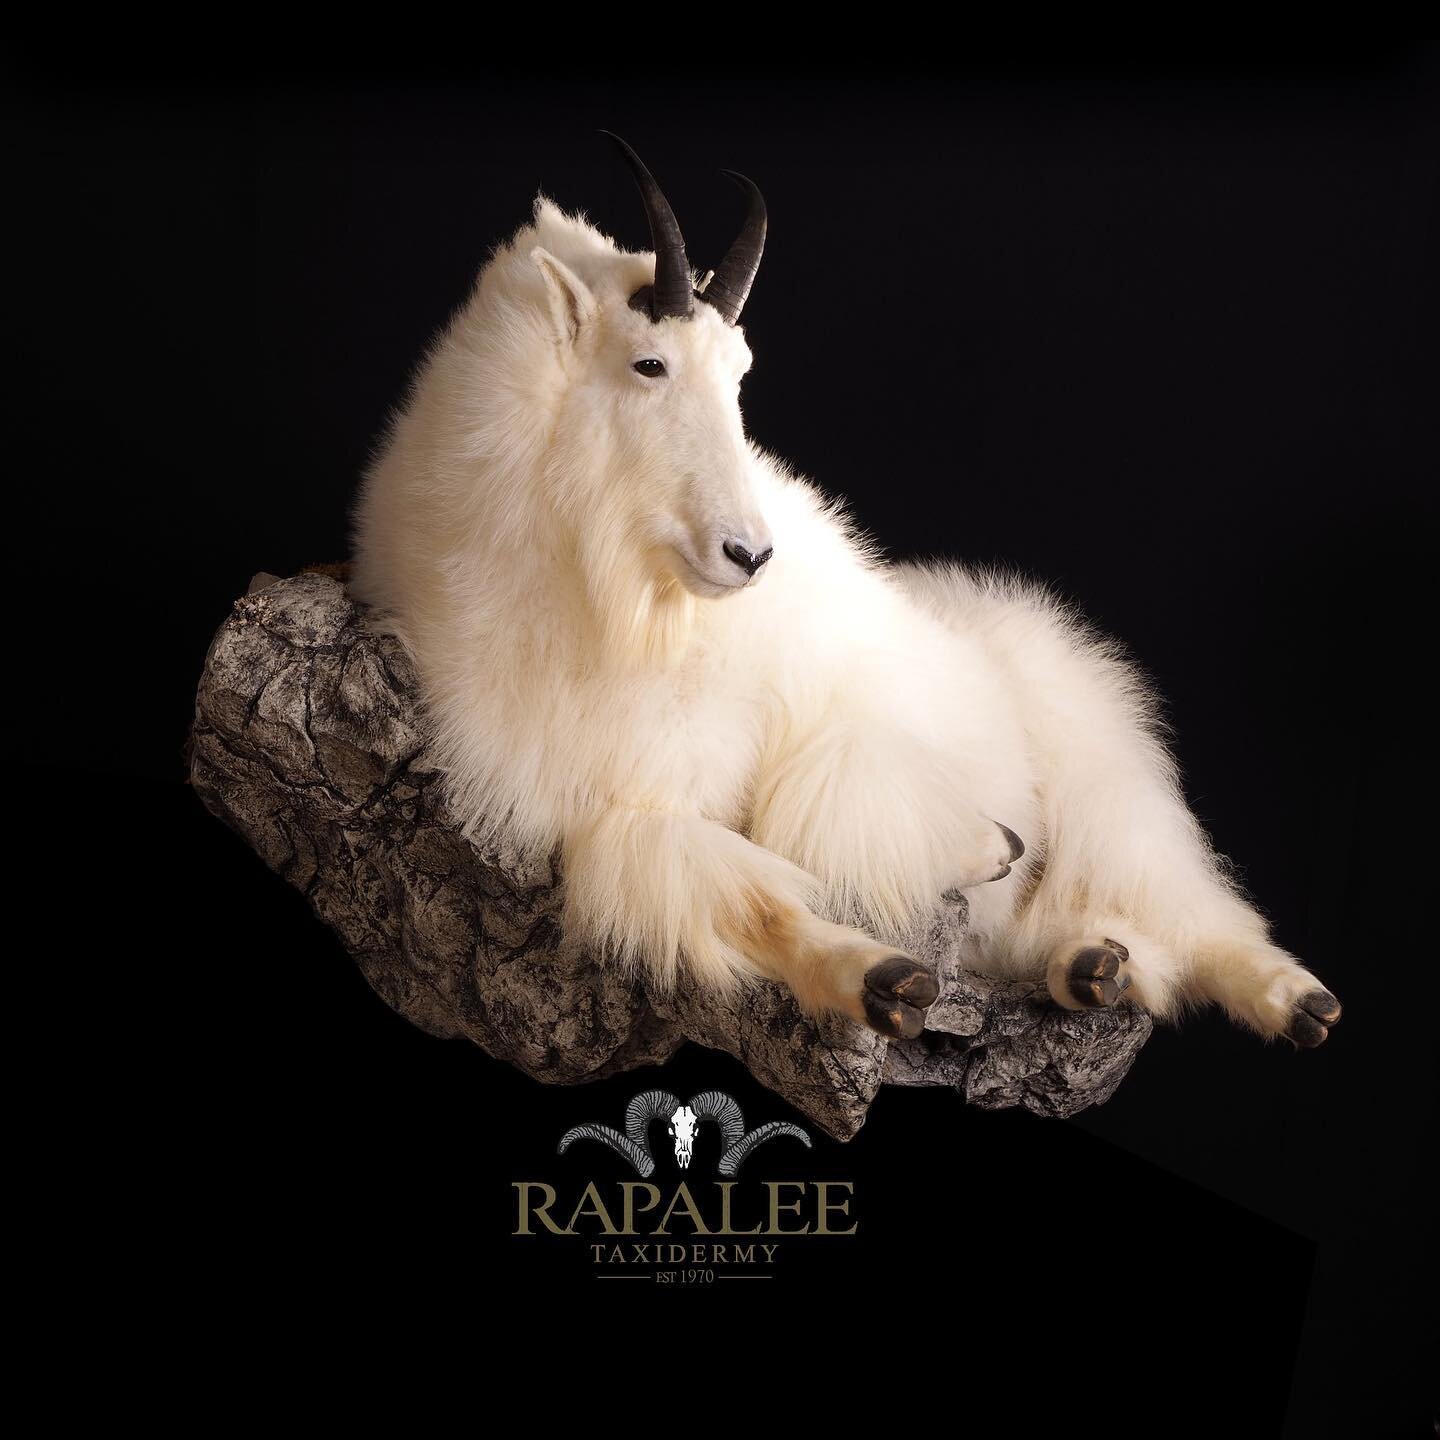 Friday fun facts&mdash; The mountain goat is the only living species in the genus Oreamnos.  Also according to Wikipedia their coats help them withstand temperatures as low as -51 degrees Fahrenheit and winds up to 99 mph. #rapaleetaxidermy #worldcla